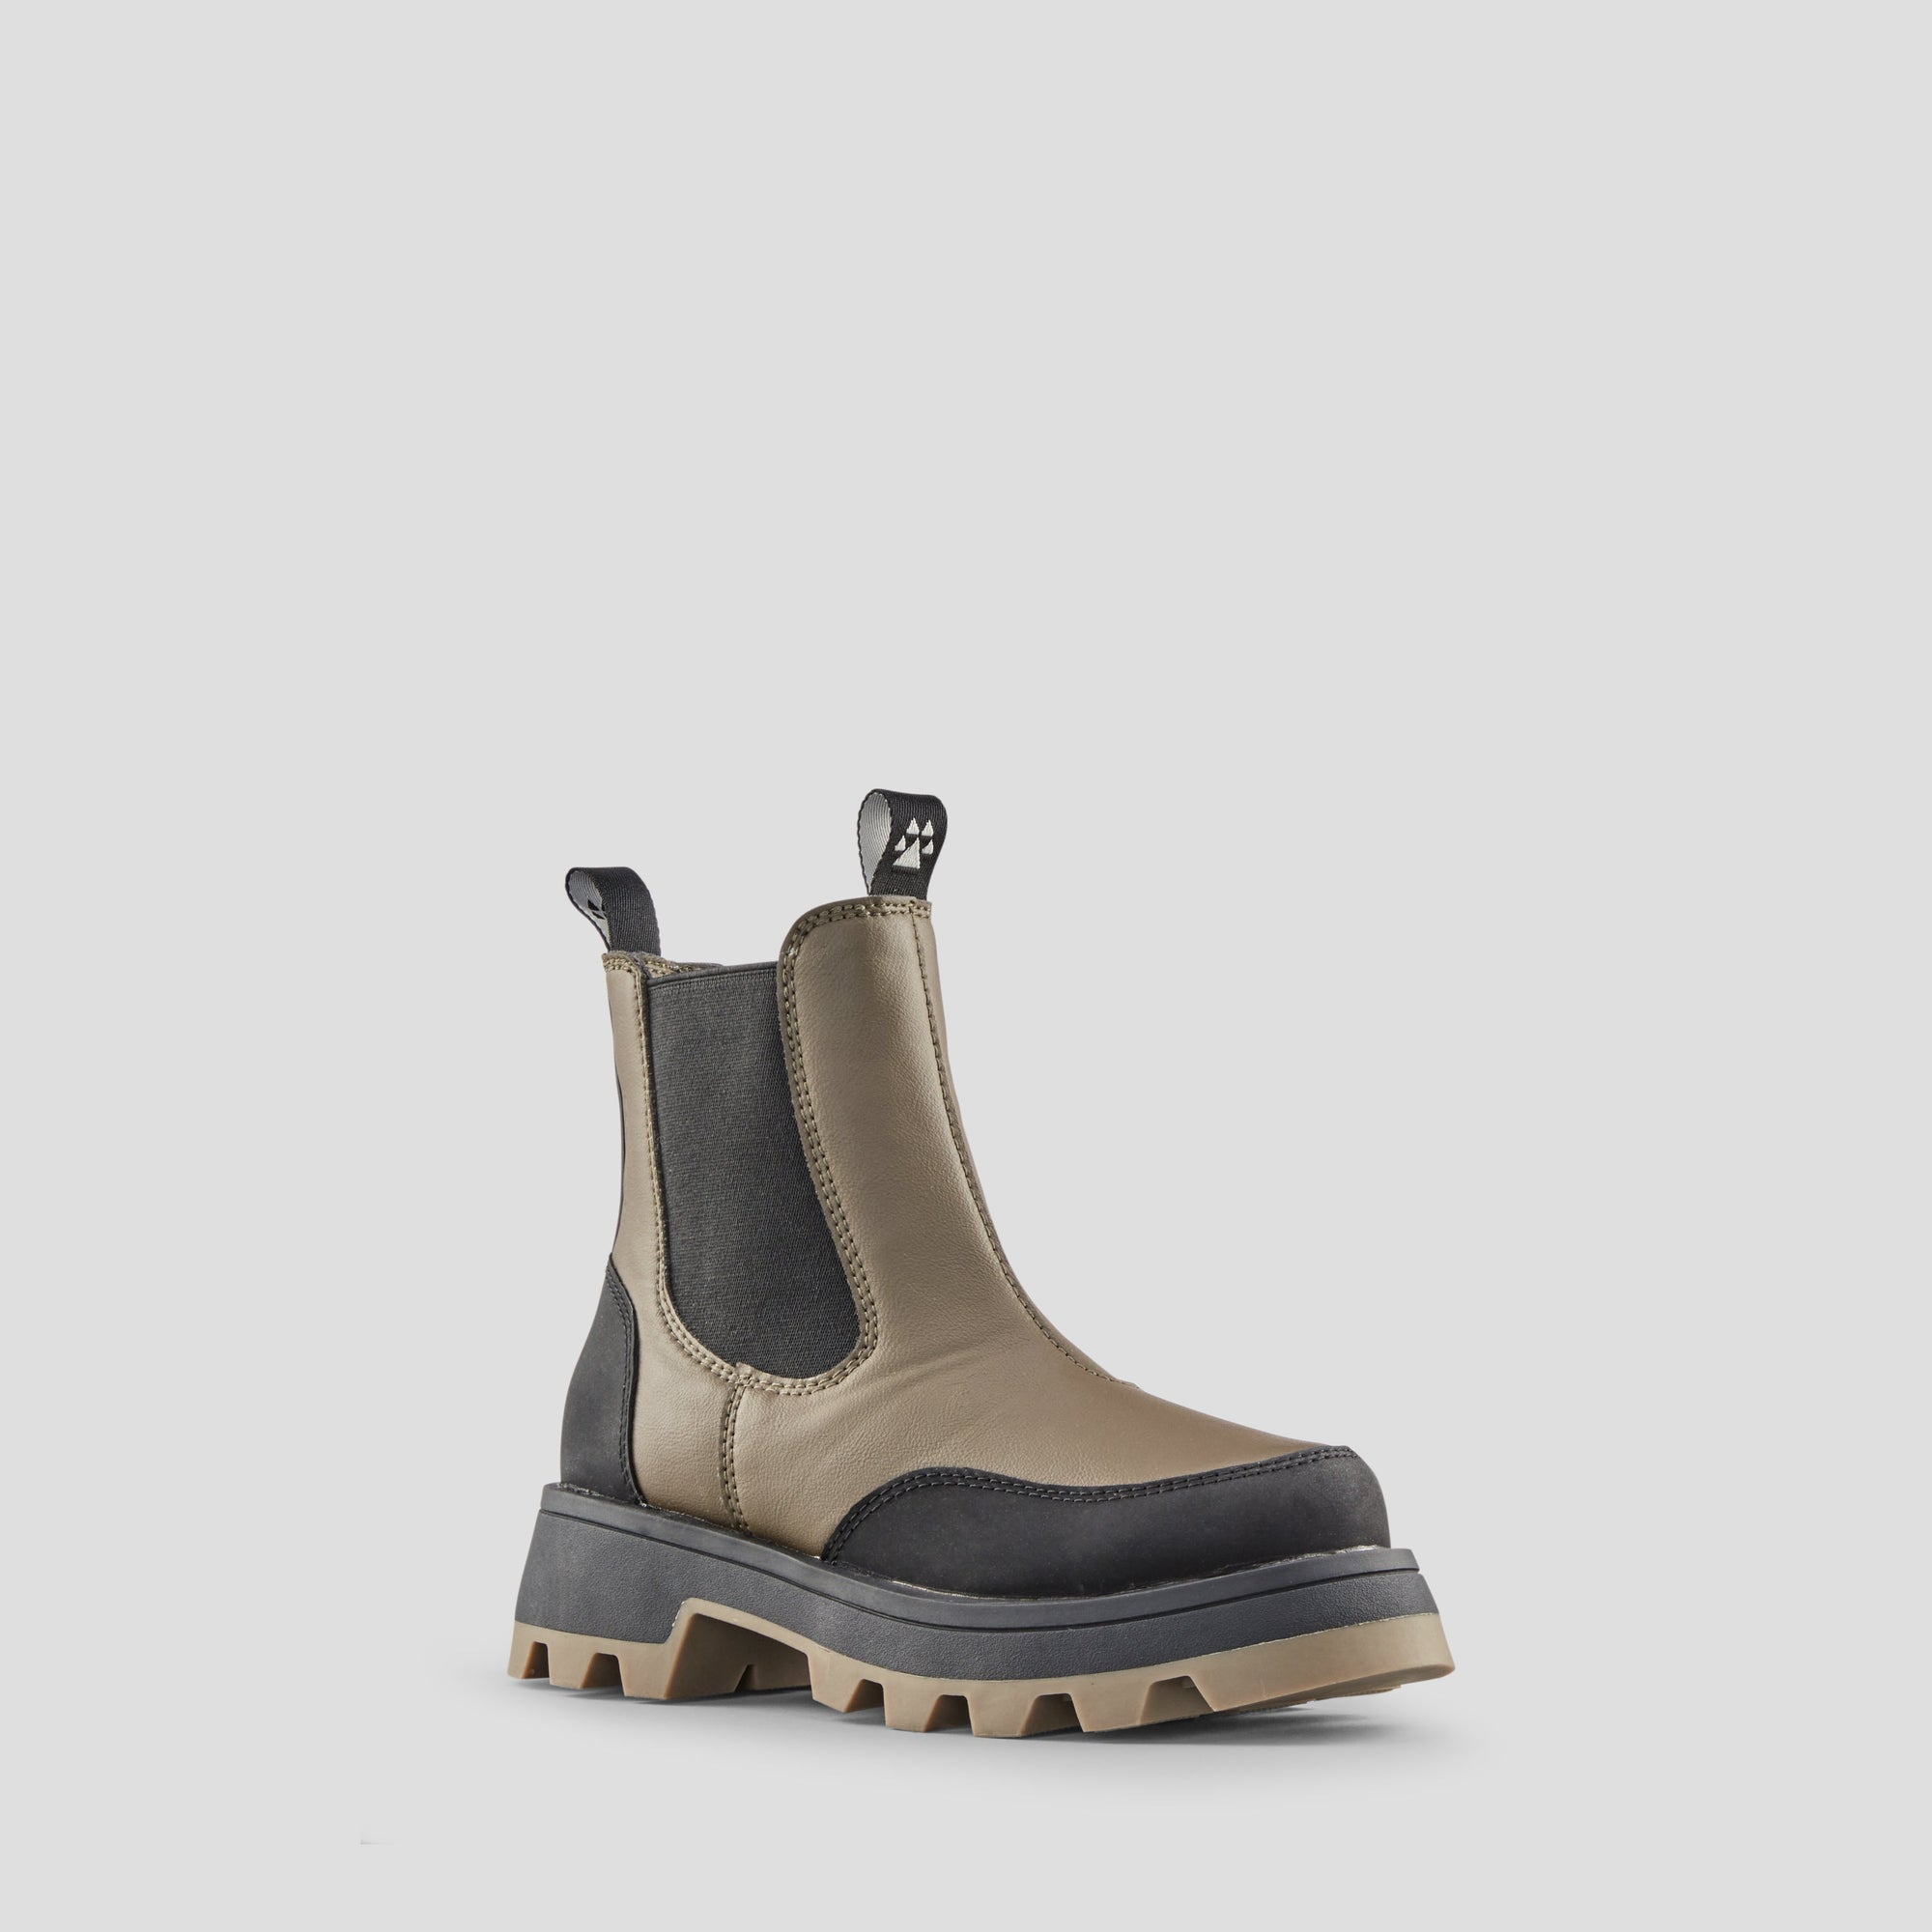 Shani K Synthetic Leather Waterproof Boot (Youth) - Colour Loden